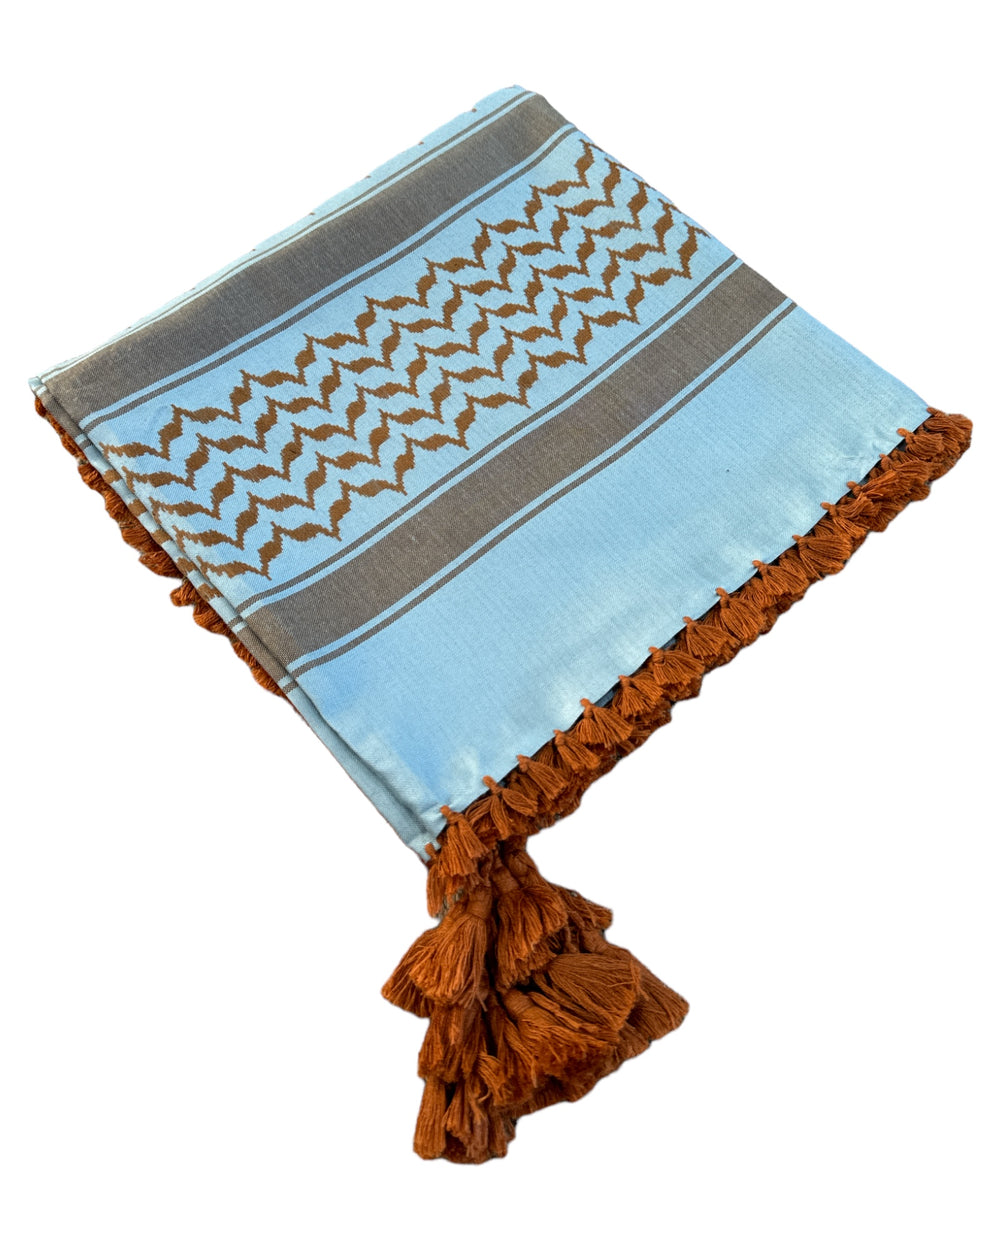 Palestine's Symbolic Shami Light Blue and Caramel Brown Pattern Design with Braids Zuhd Shemag 43